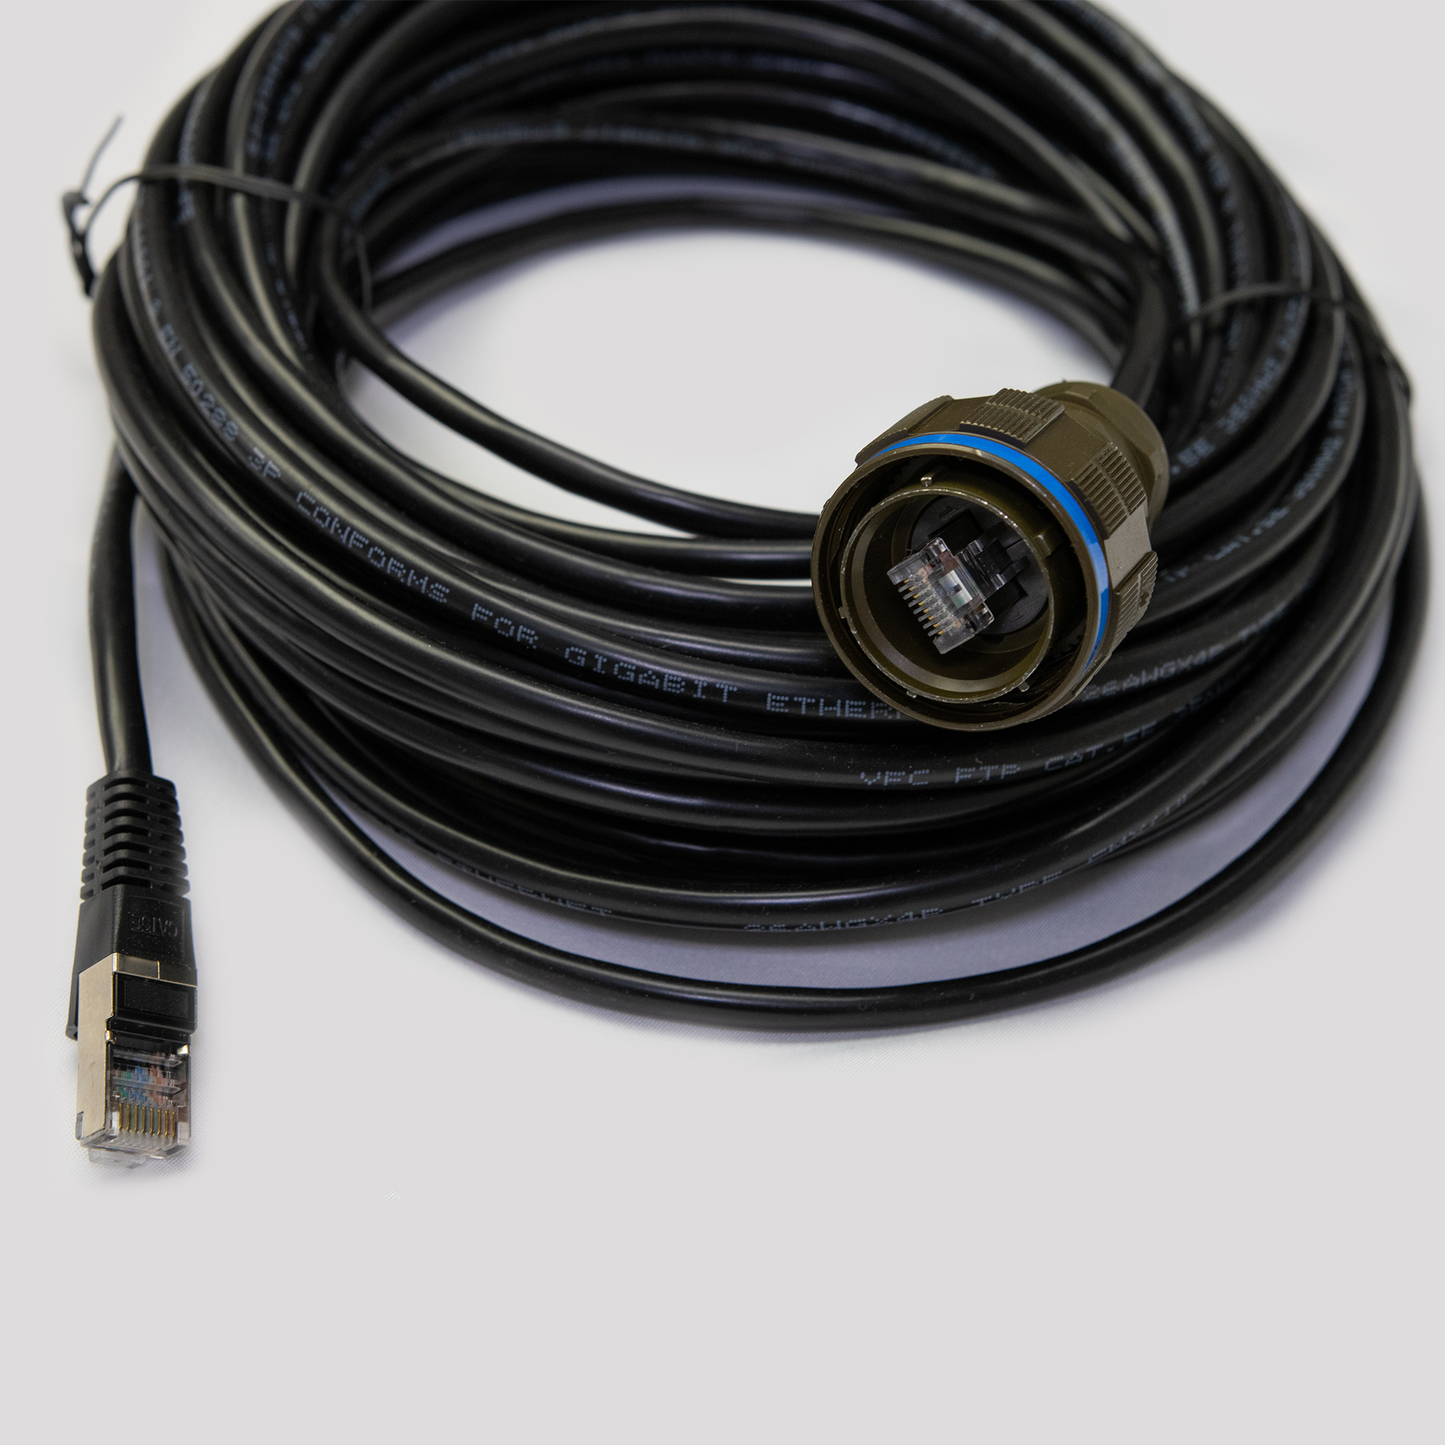 50' Tether Kit Ethernet Cable (Sentry and Spectre)